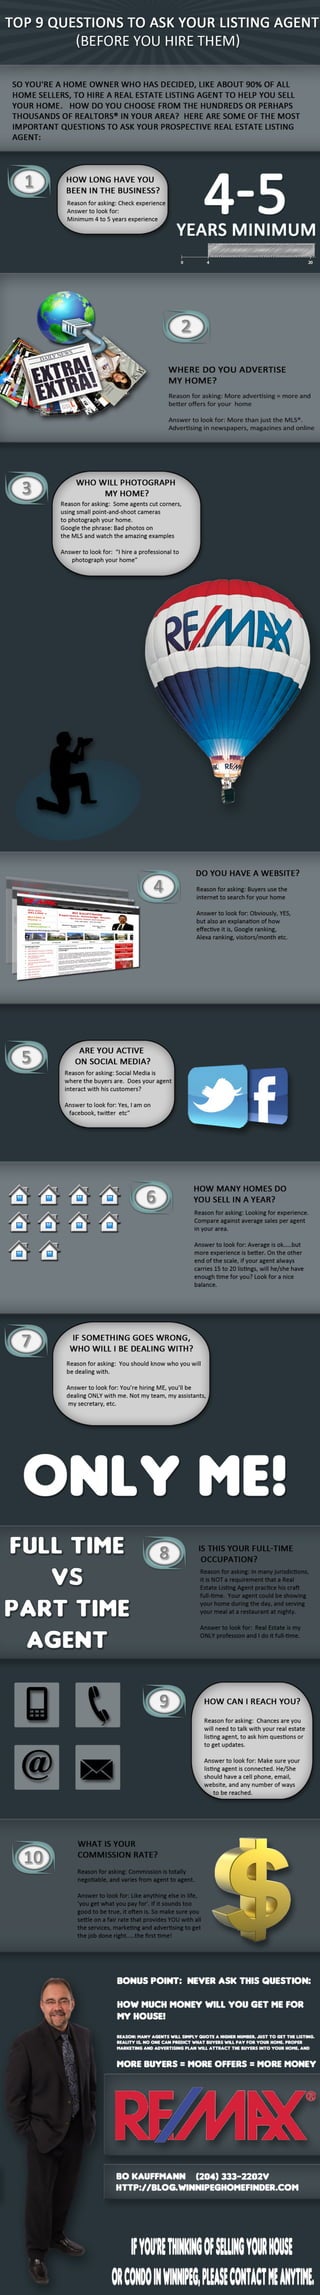 10 questions to ask your real estate agent (infographic)